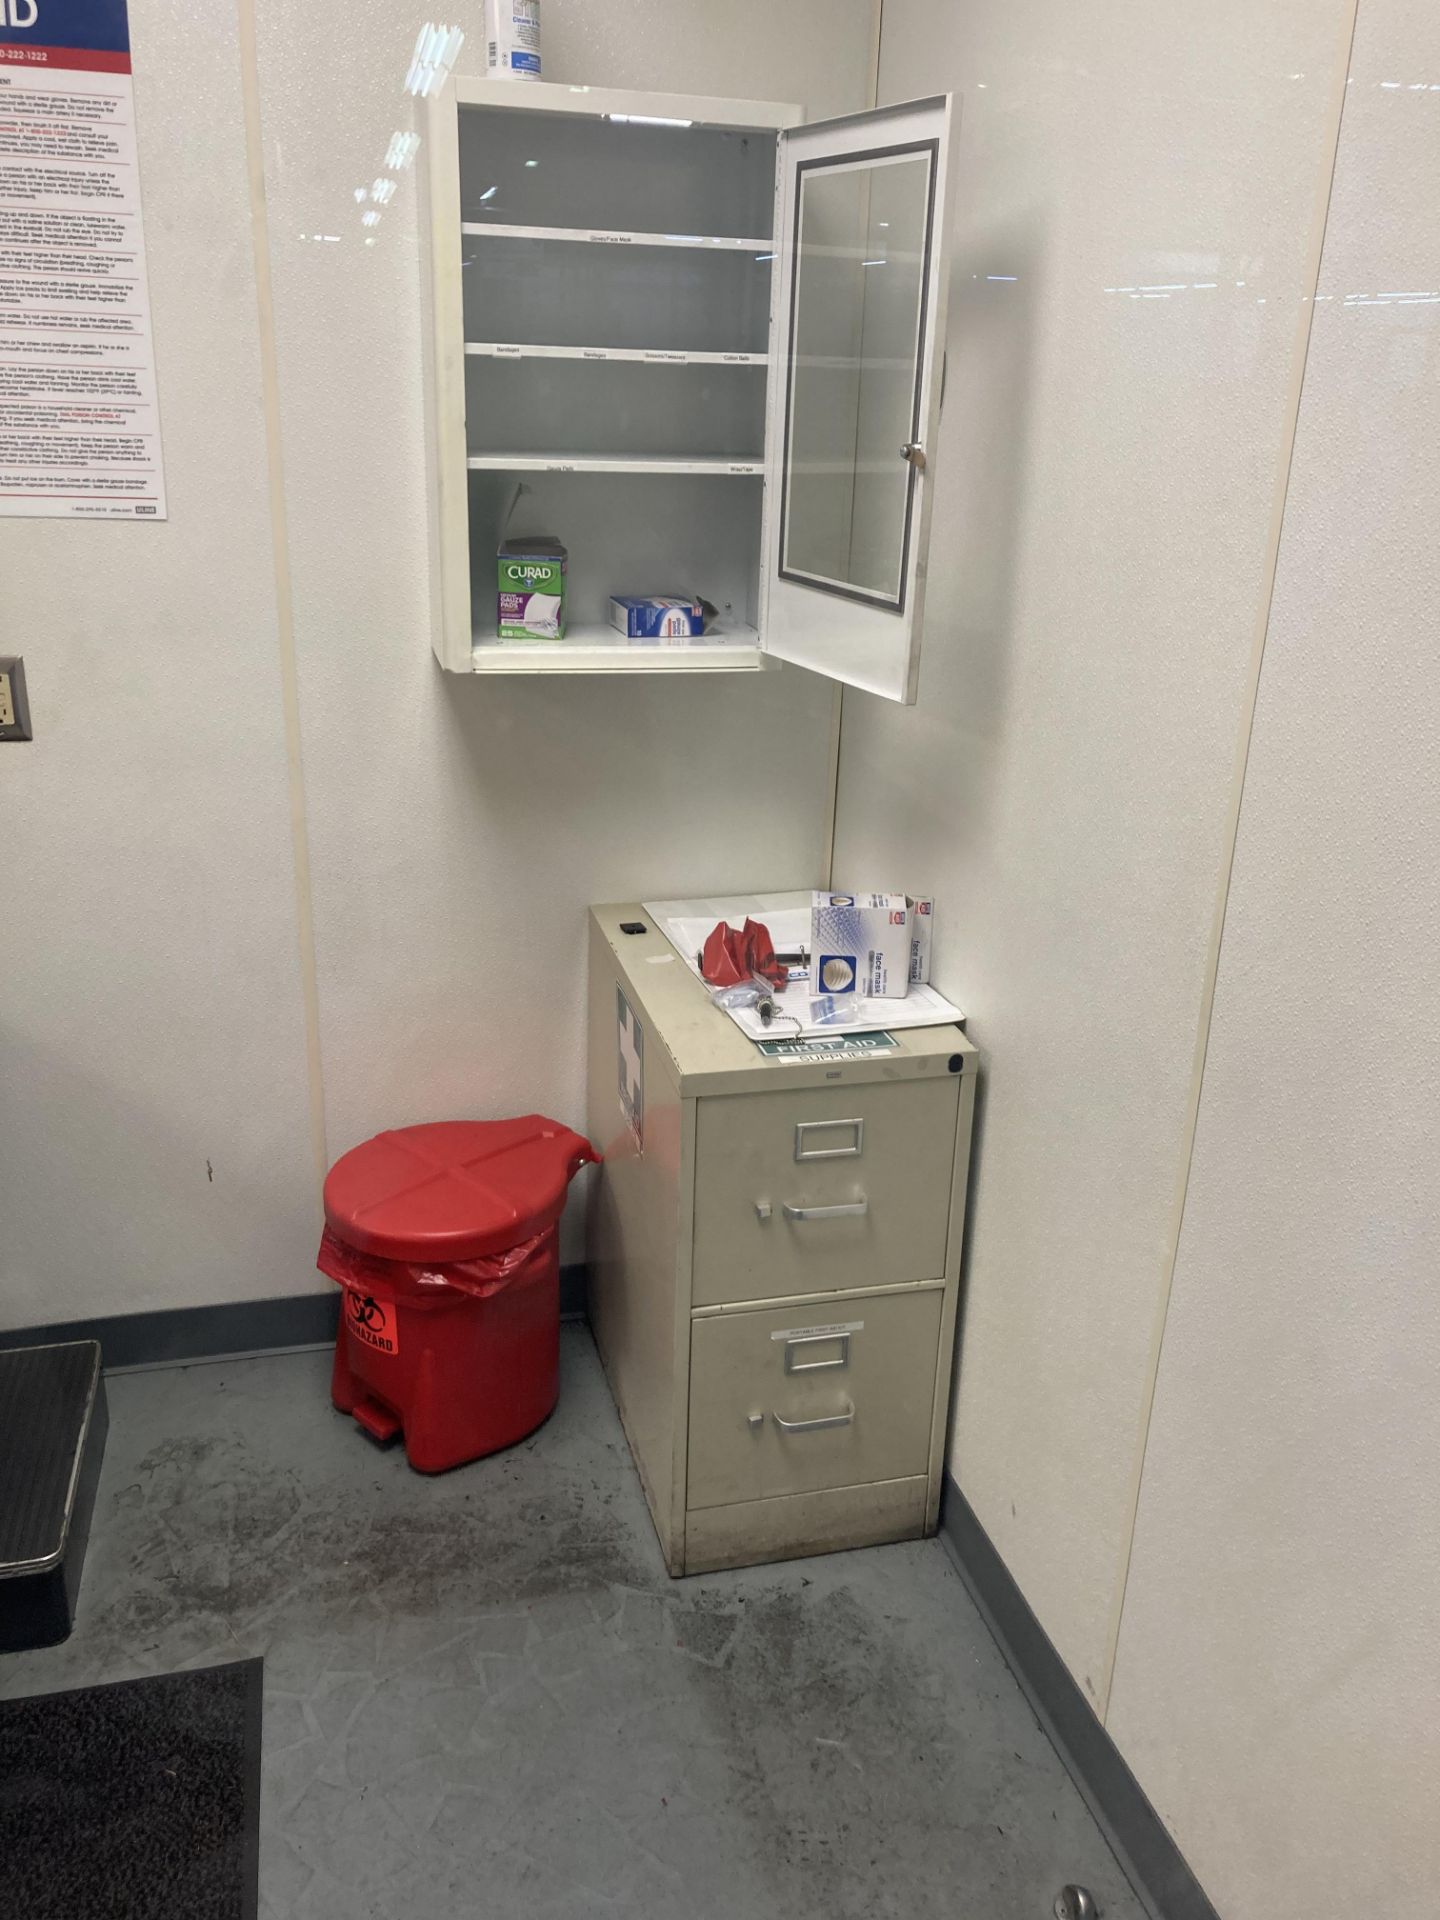 Contents of First Aid/Medical Room - Image 2 of 3